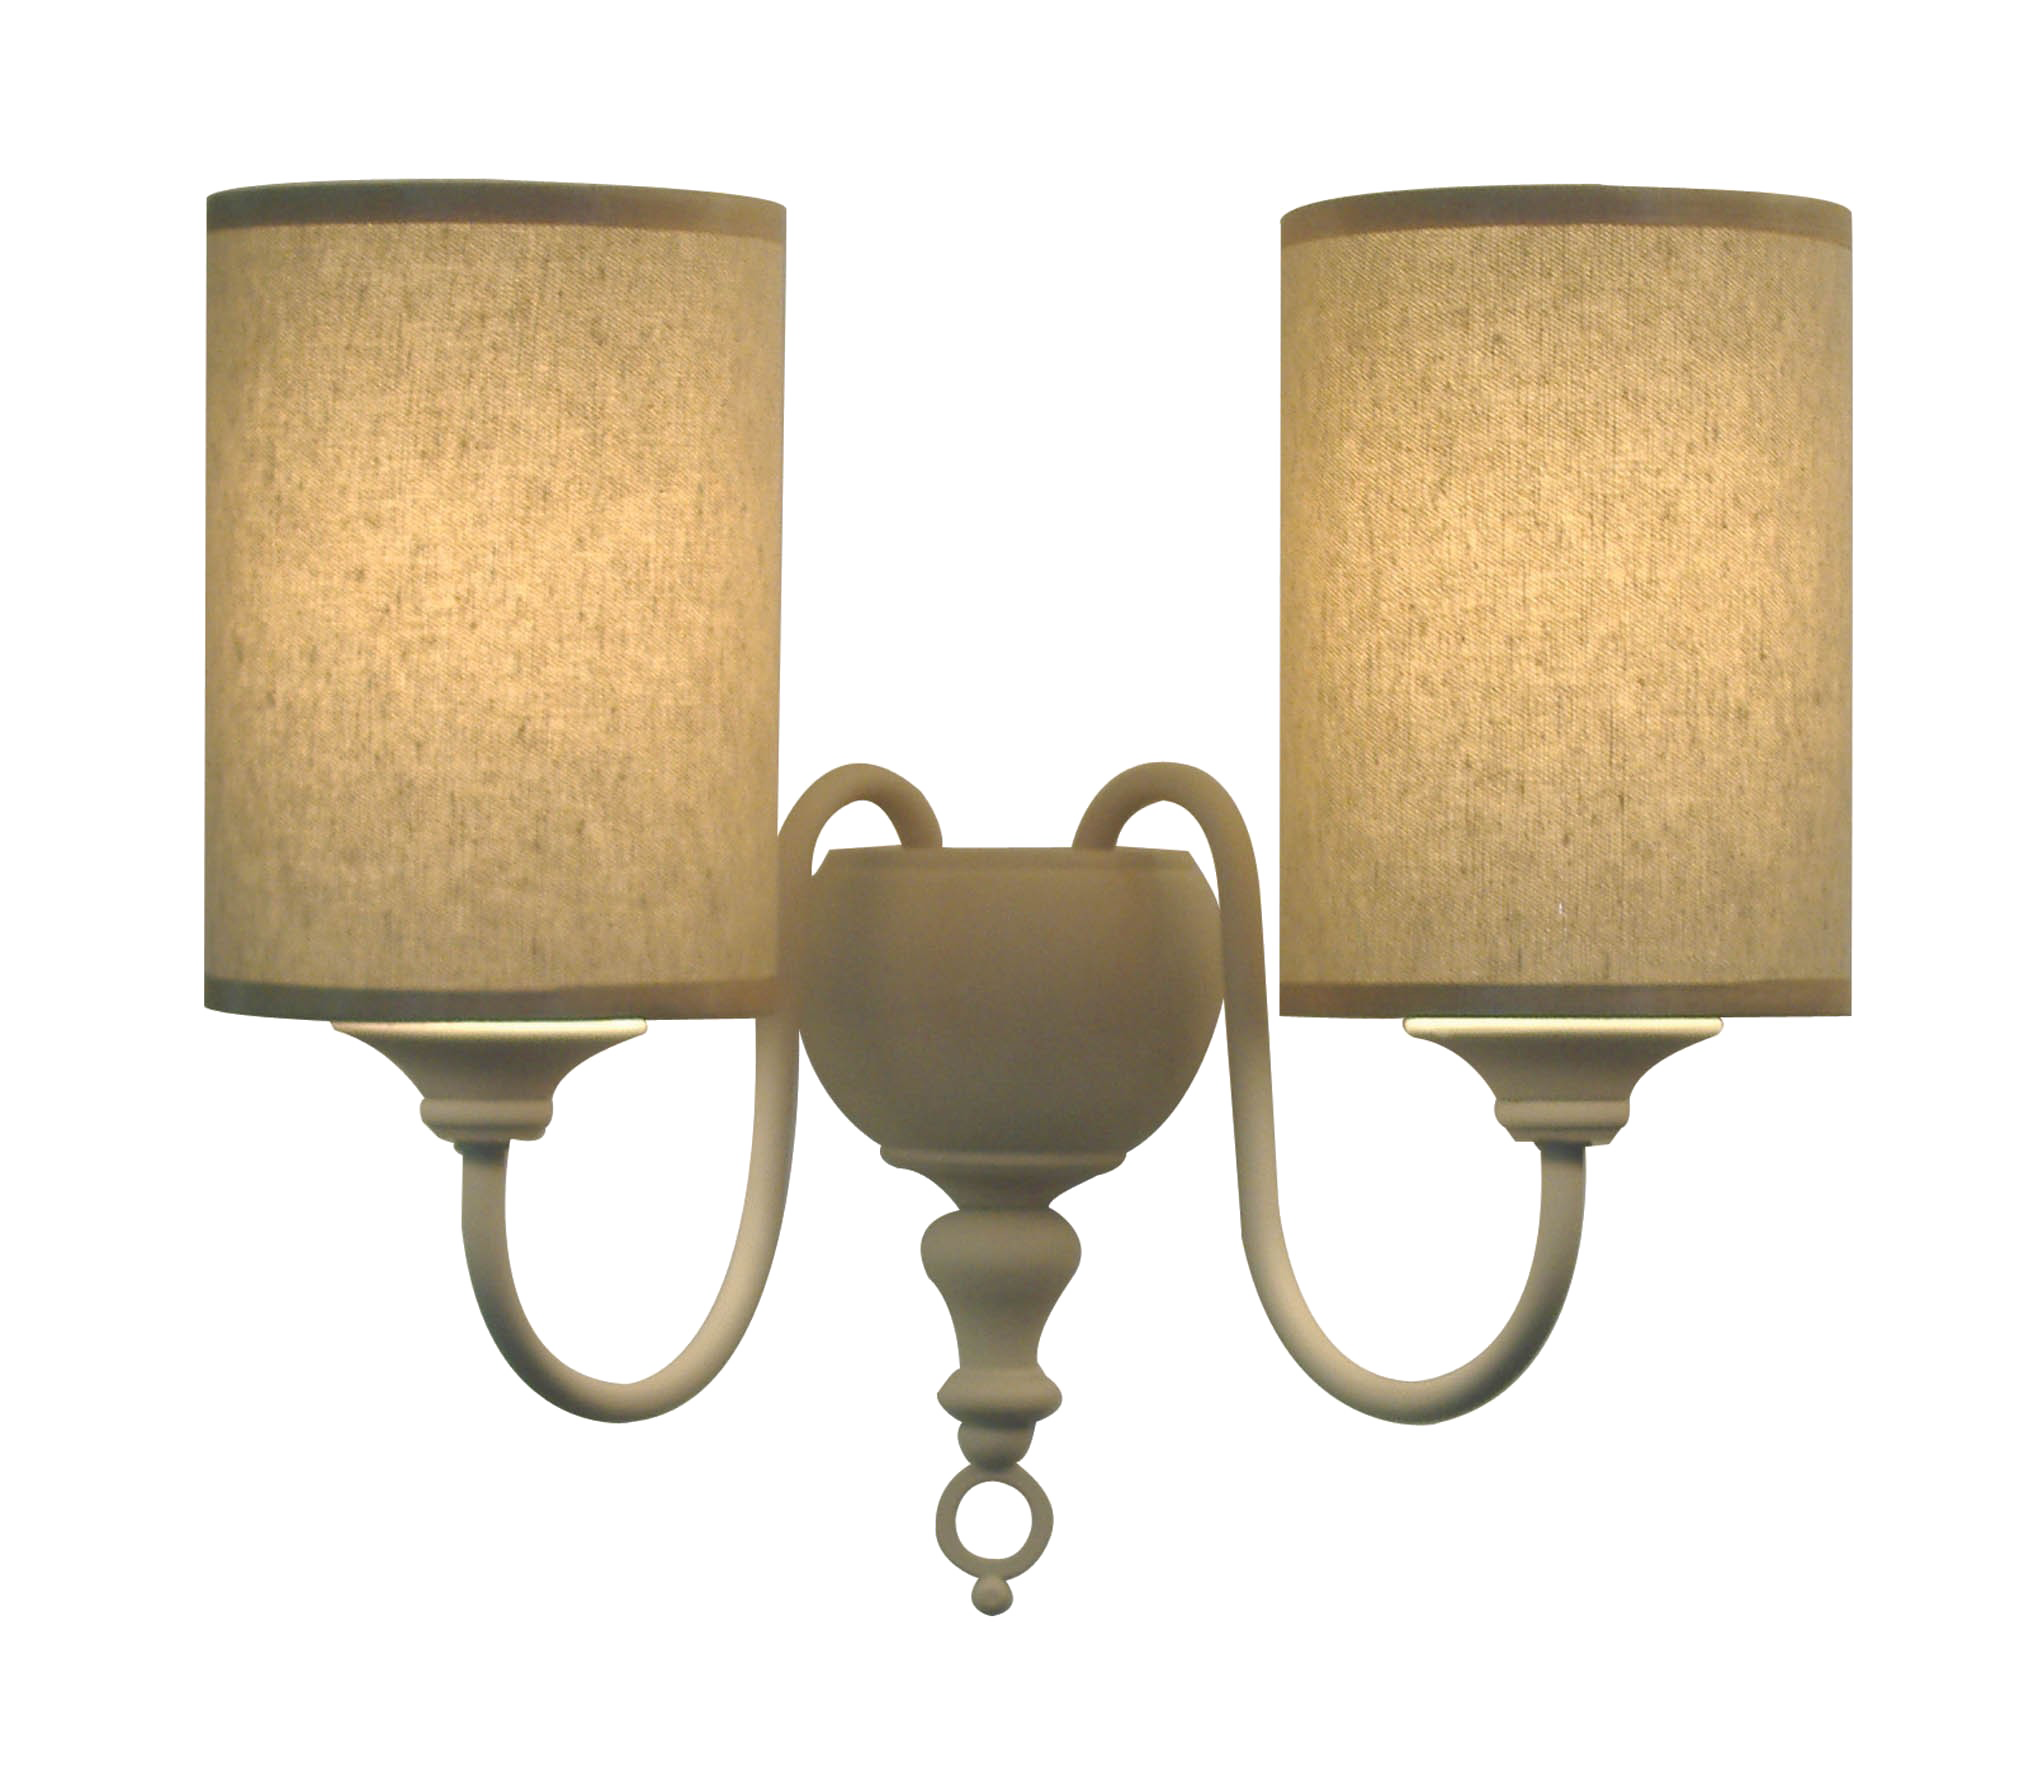 Wall Light Download PNG Image High Quality PNG Image